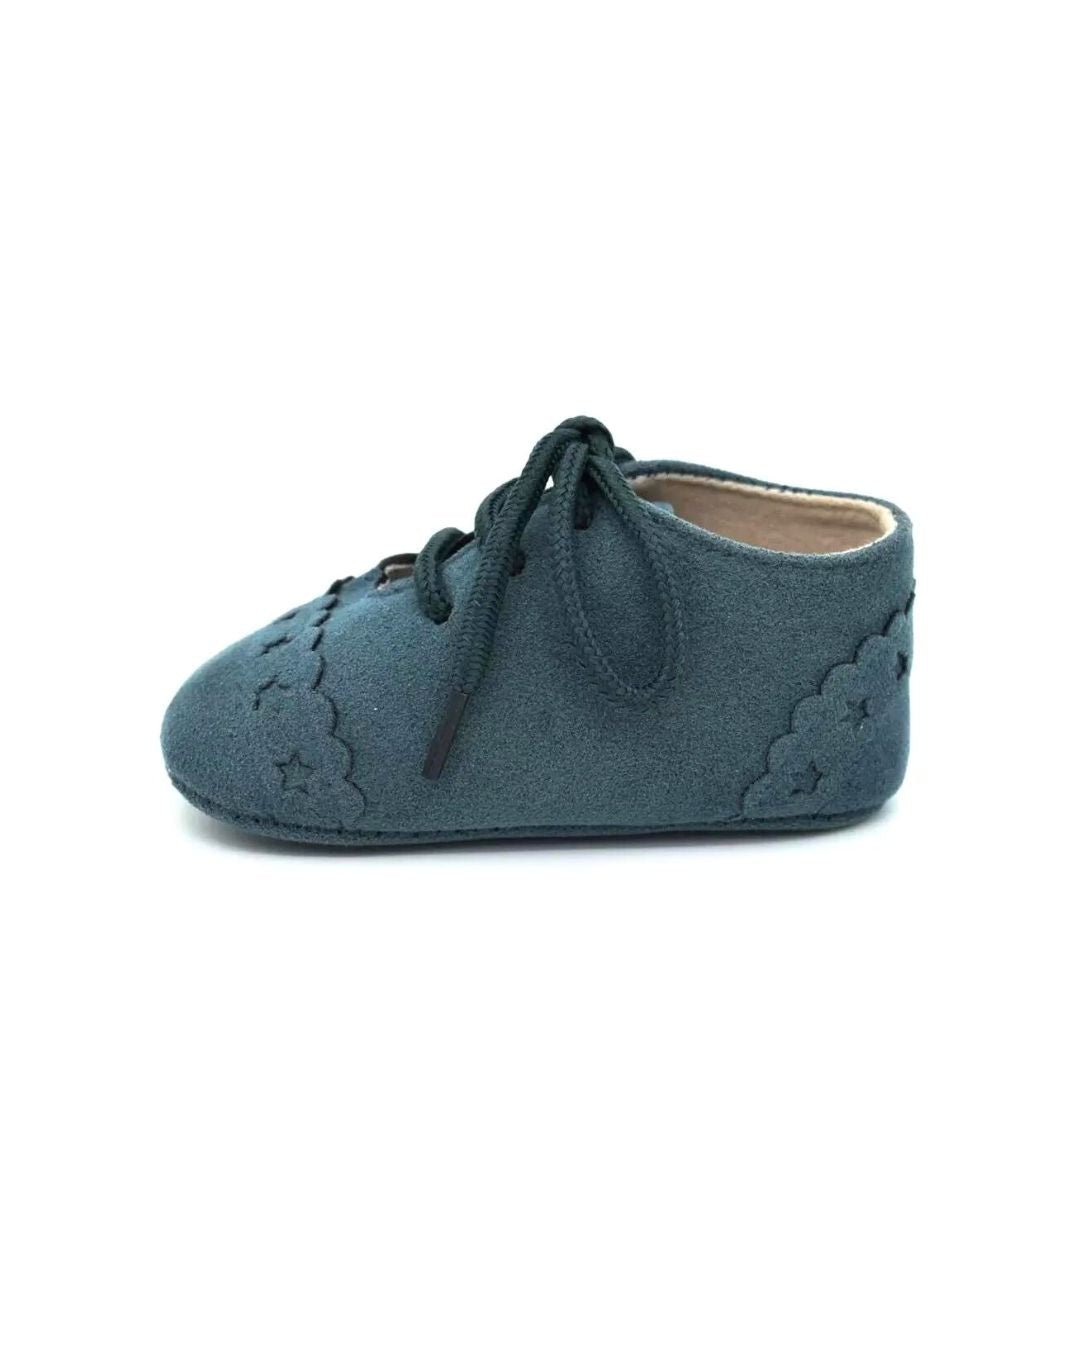 Suede Baby Oxfords | Green - Shoes - LUCKY PANDA KIDS